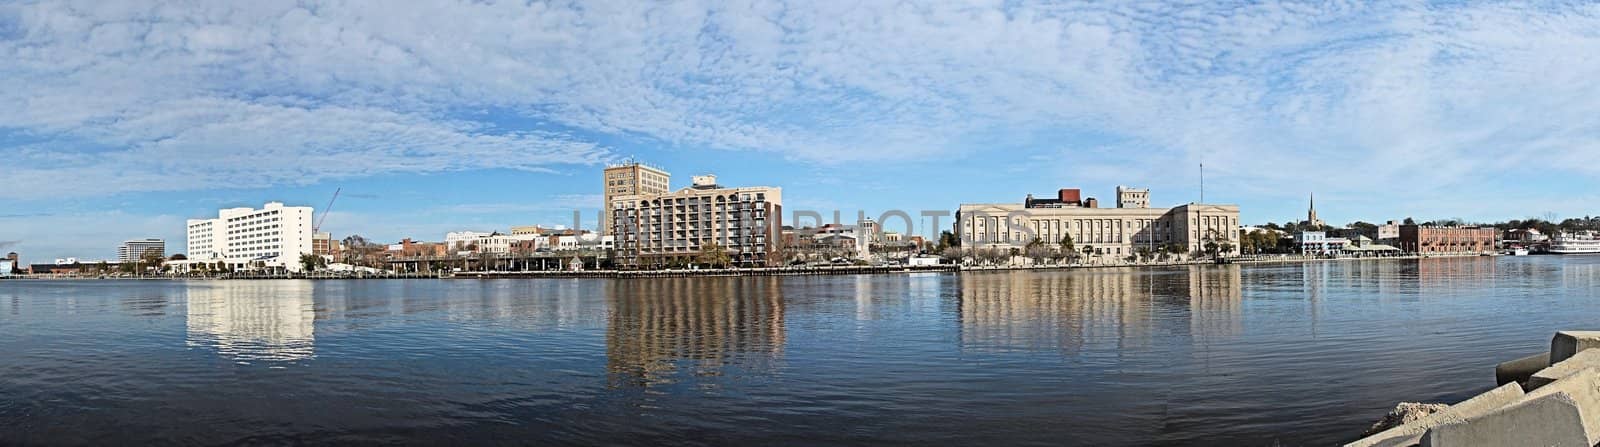 A panoramic view of downtown Wilmington, North Carolina